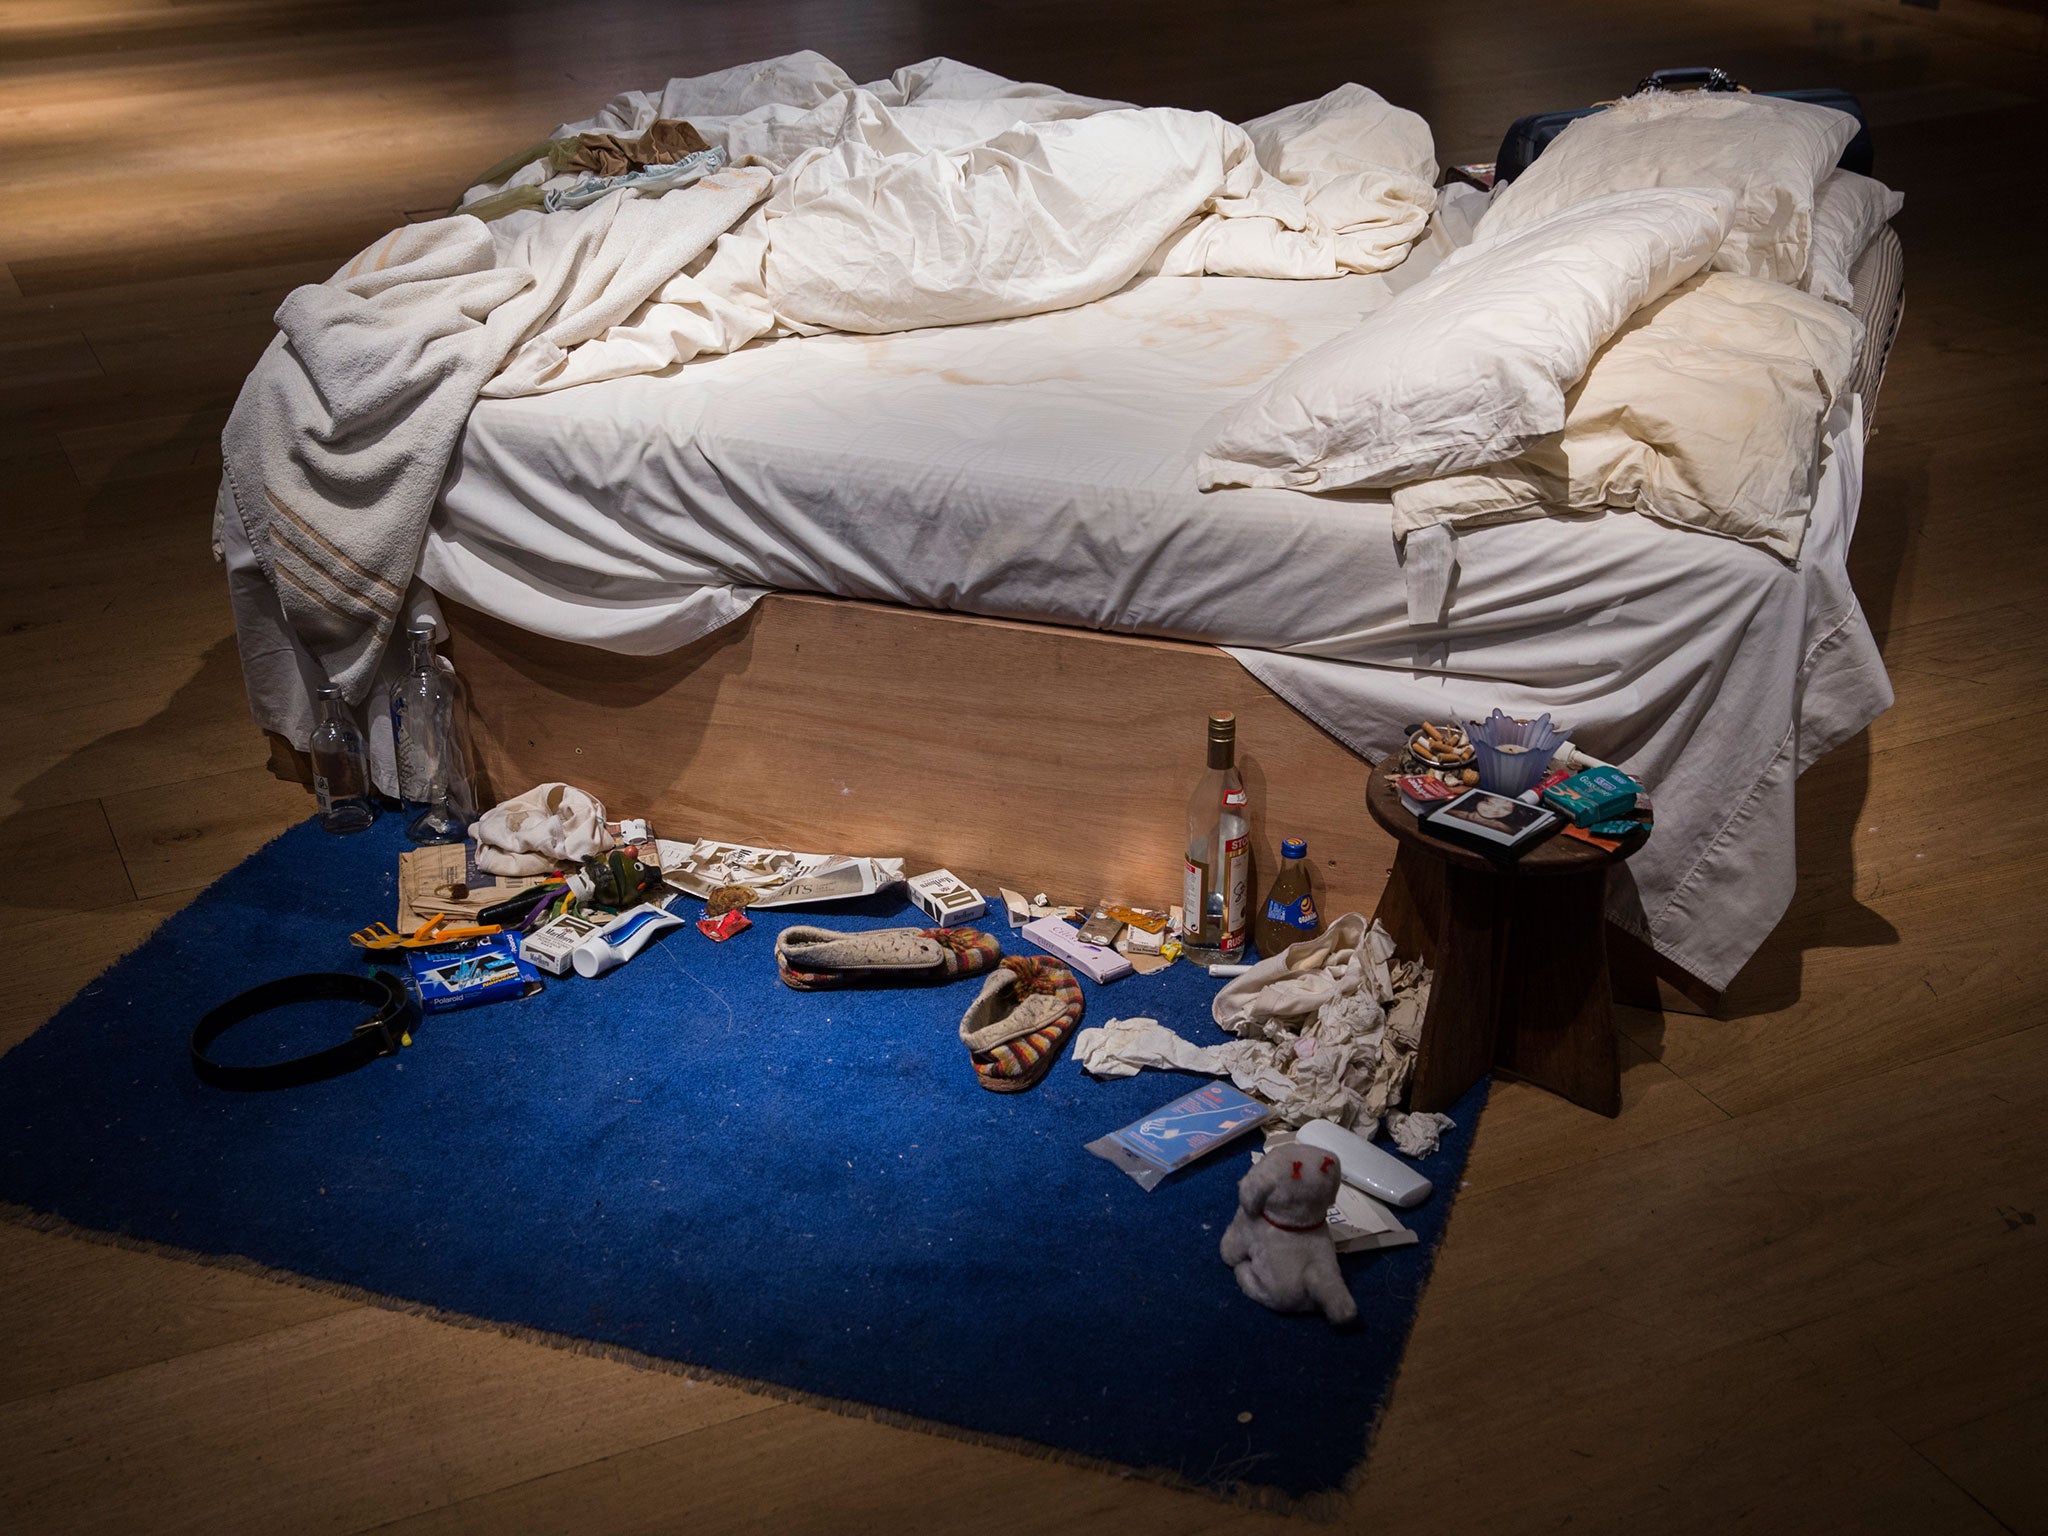 Tracy Emin's 1998 piece 'My Bed' on display at Christie's